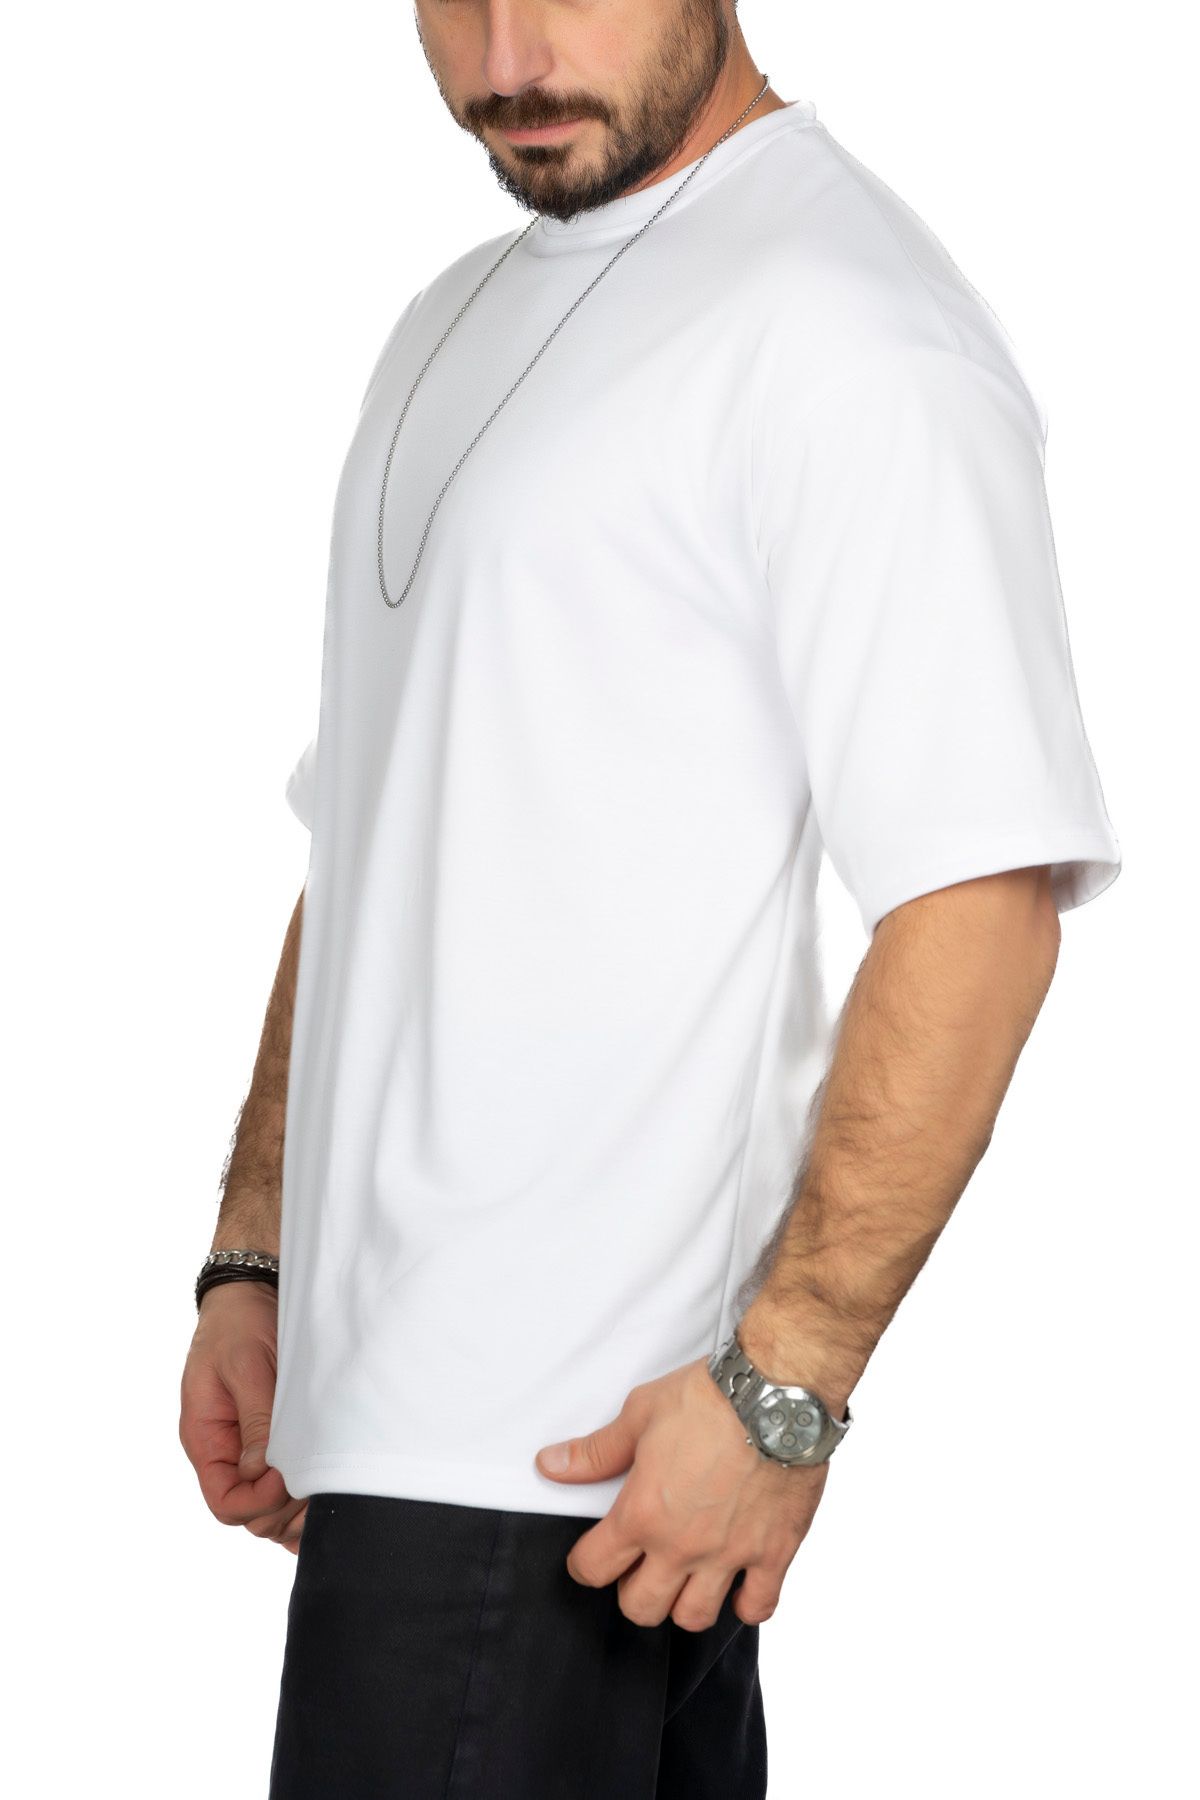 MAXI DRY Sweat Absorbing, Anti-Excessive Sweating, Wet-Proof White Men's  T-Shirt - Oversize - Thermal T-shirt